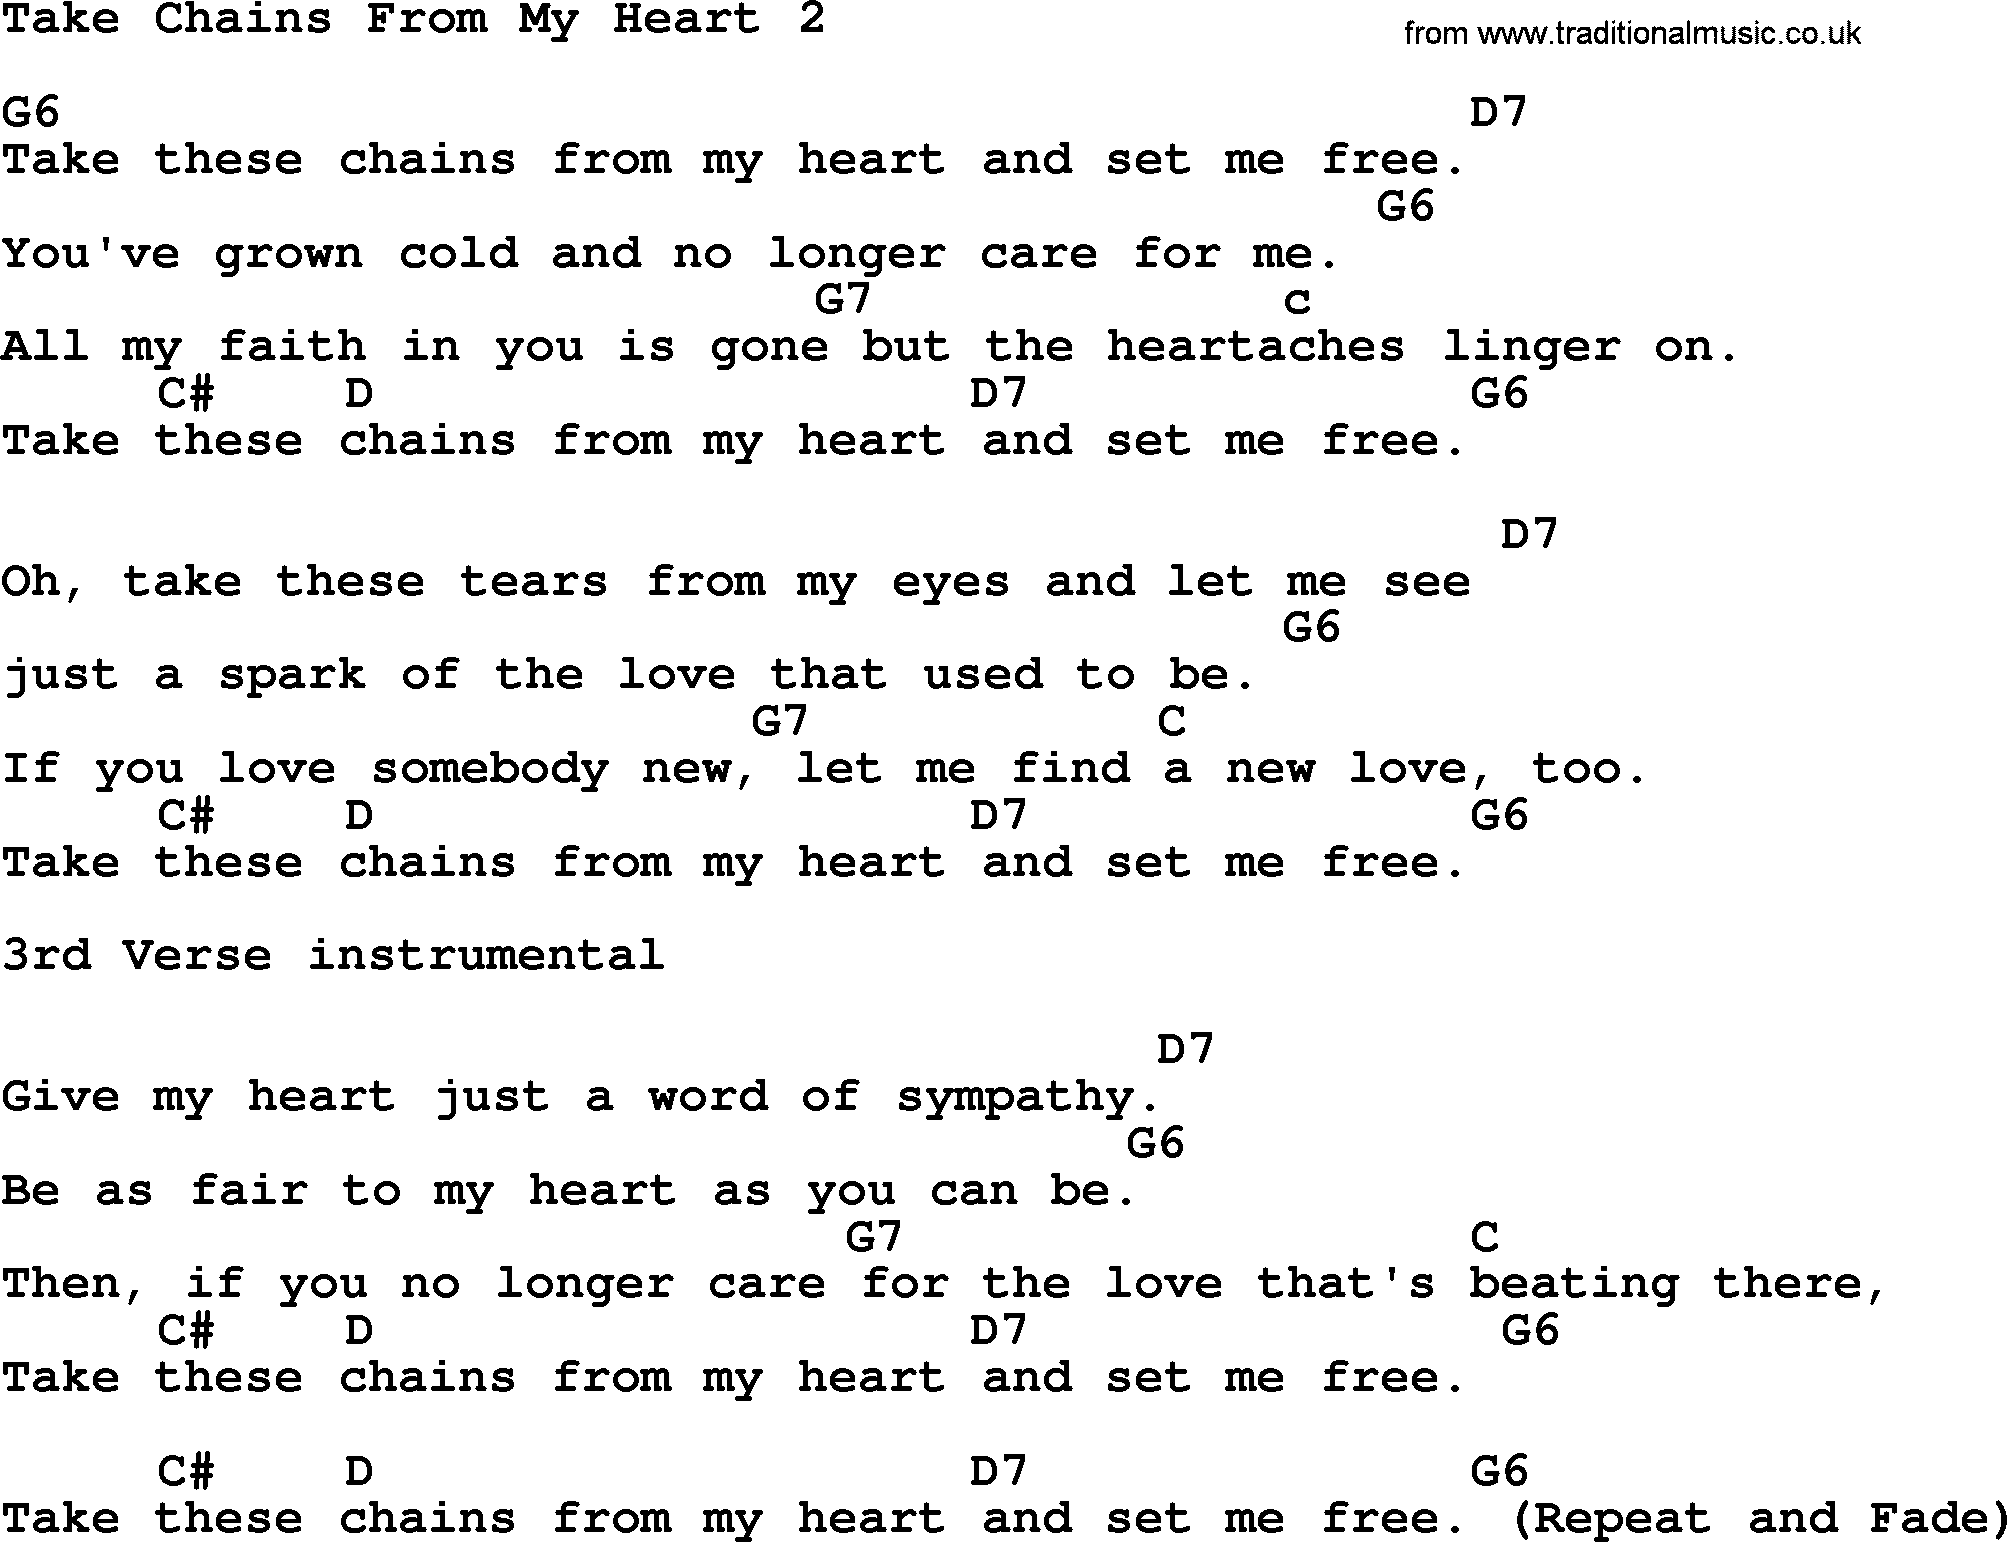 Hank Williams song Take Chains From My Heart2, lyrics and chords